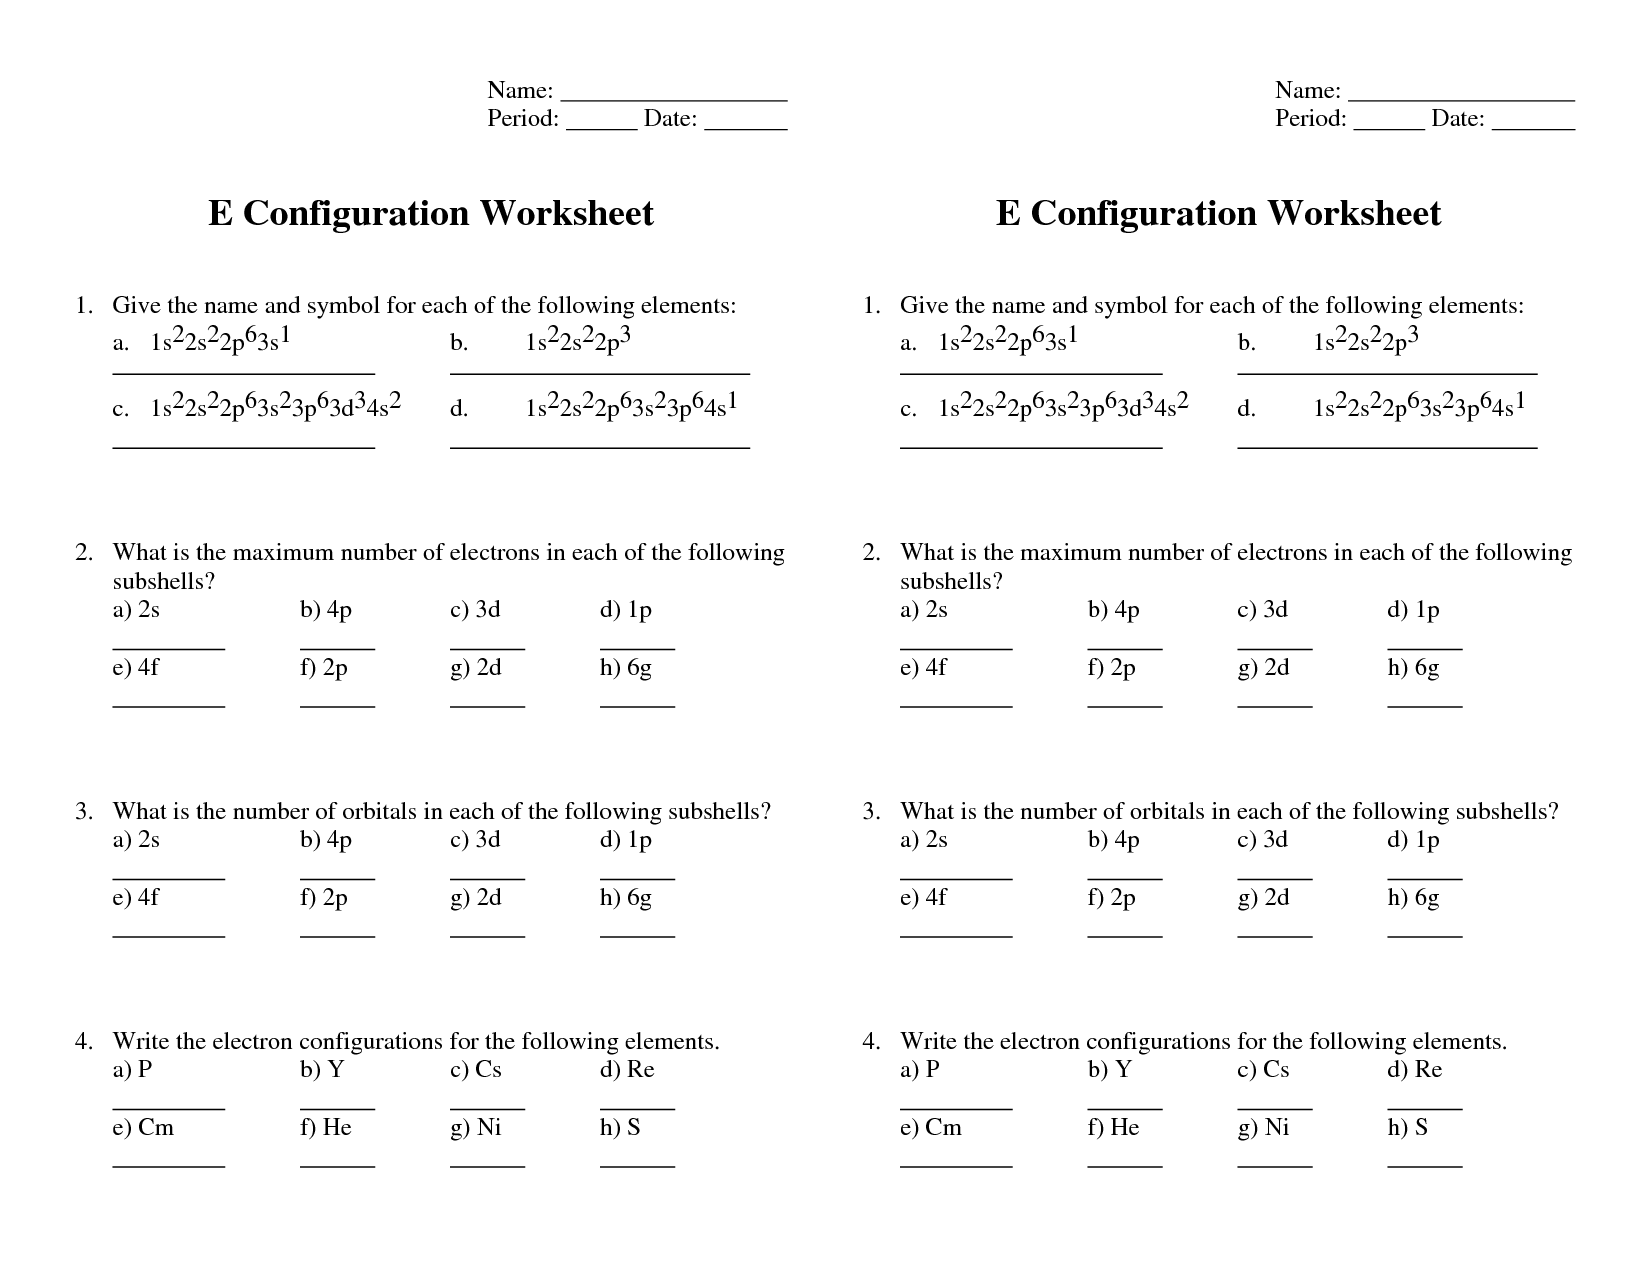 electron-configuration-practice-worksheet-answer-key-chemistry-athens-mutual-student-corner